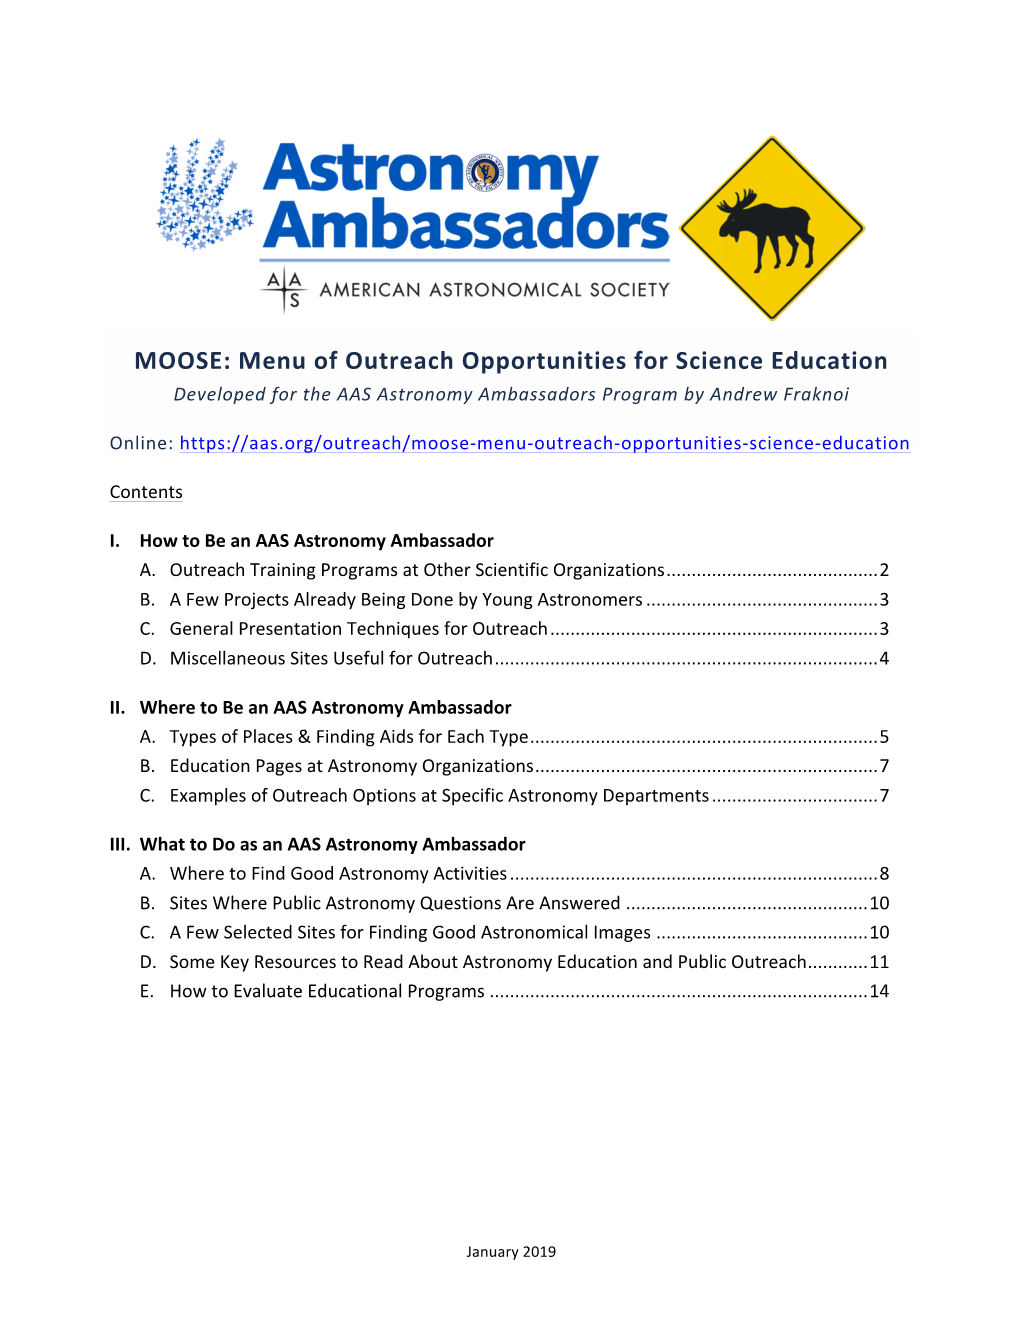 MOOSE: Menu of Outreach Opportunities for Science Education Developed for the AAS Astronomy Ambassadors Program by Andrew Fraknoi